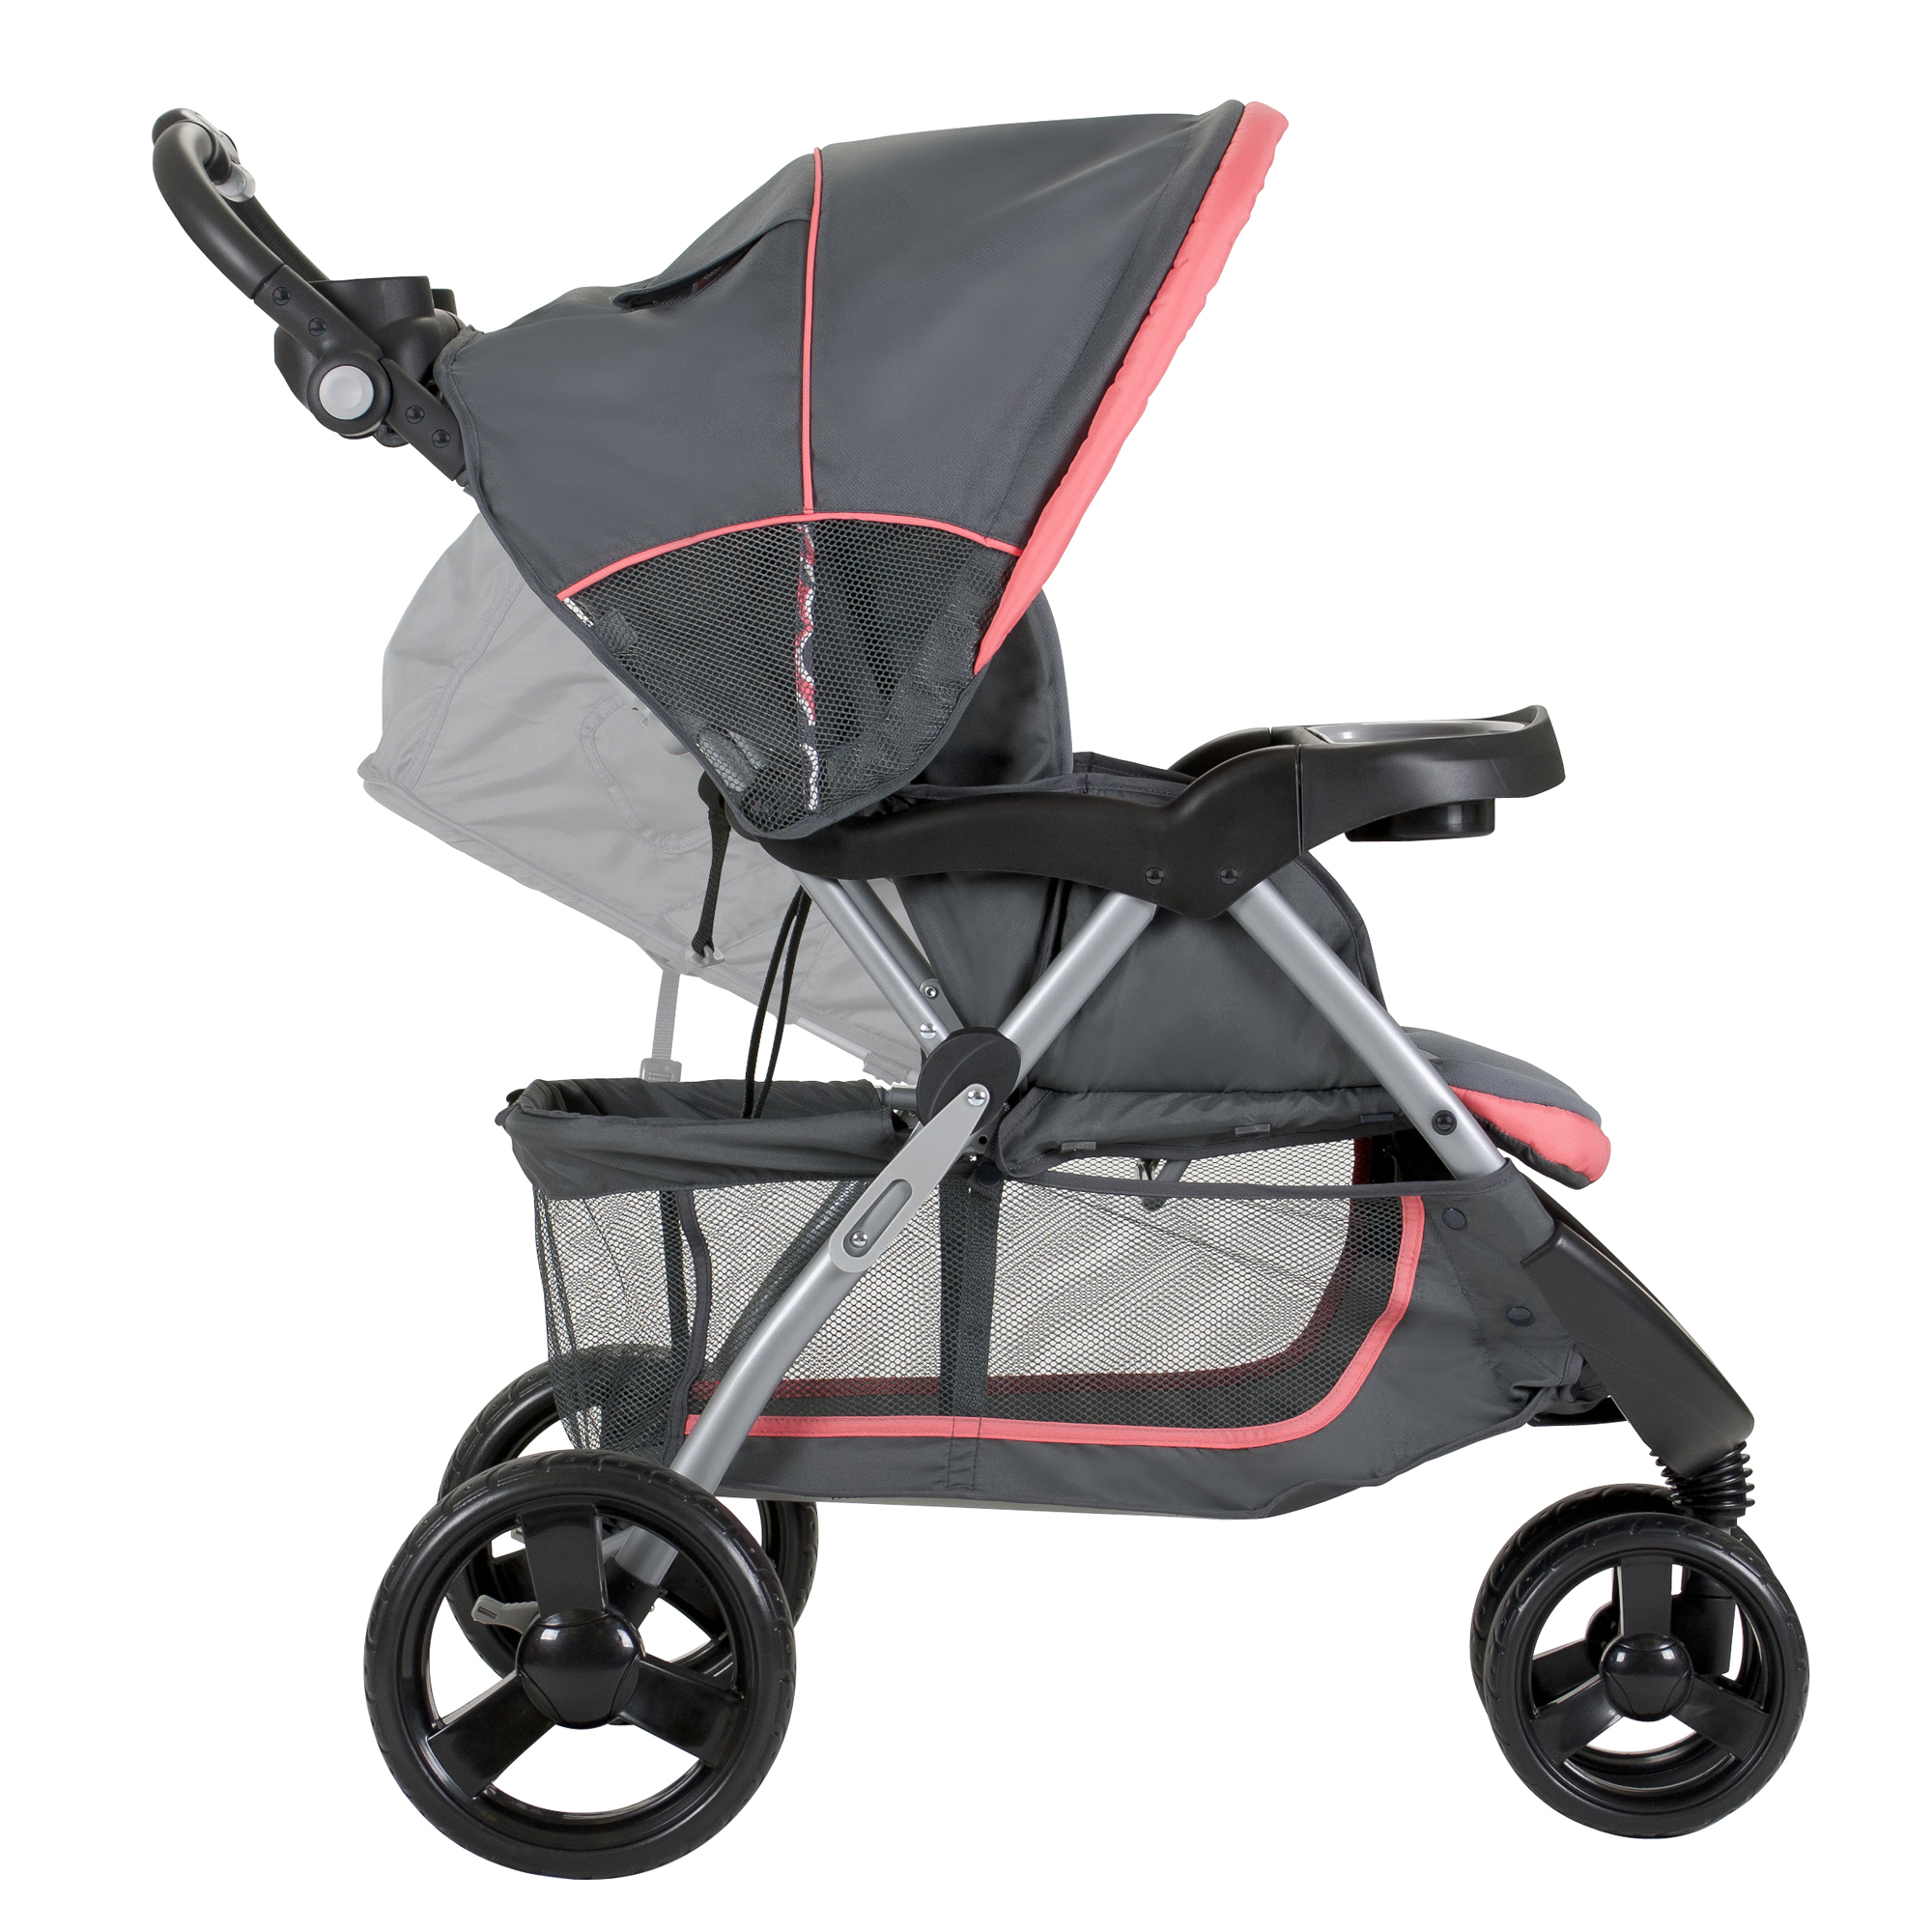 Baby Trend Nexton Travel System Stroller, Coral Floral - image 5 of 7